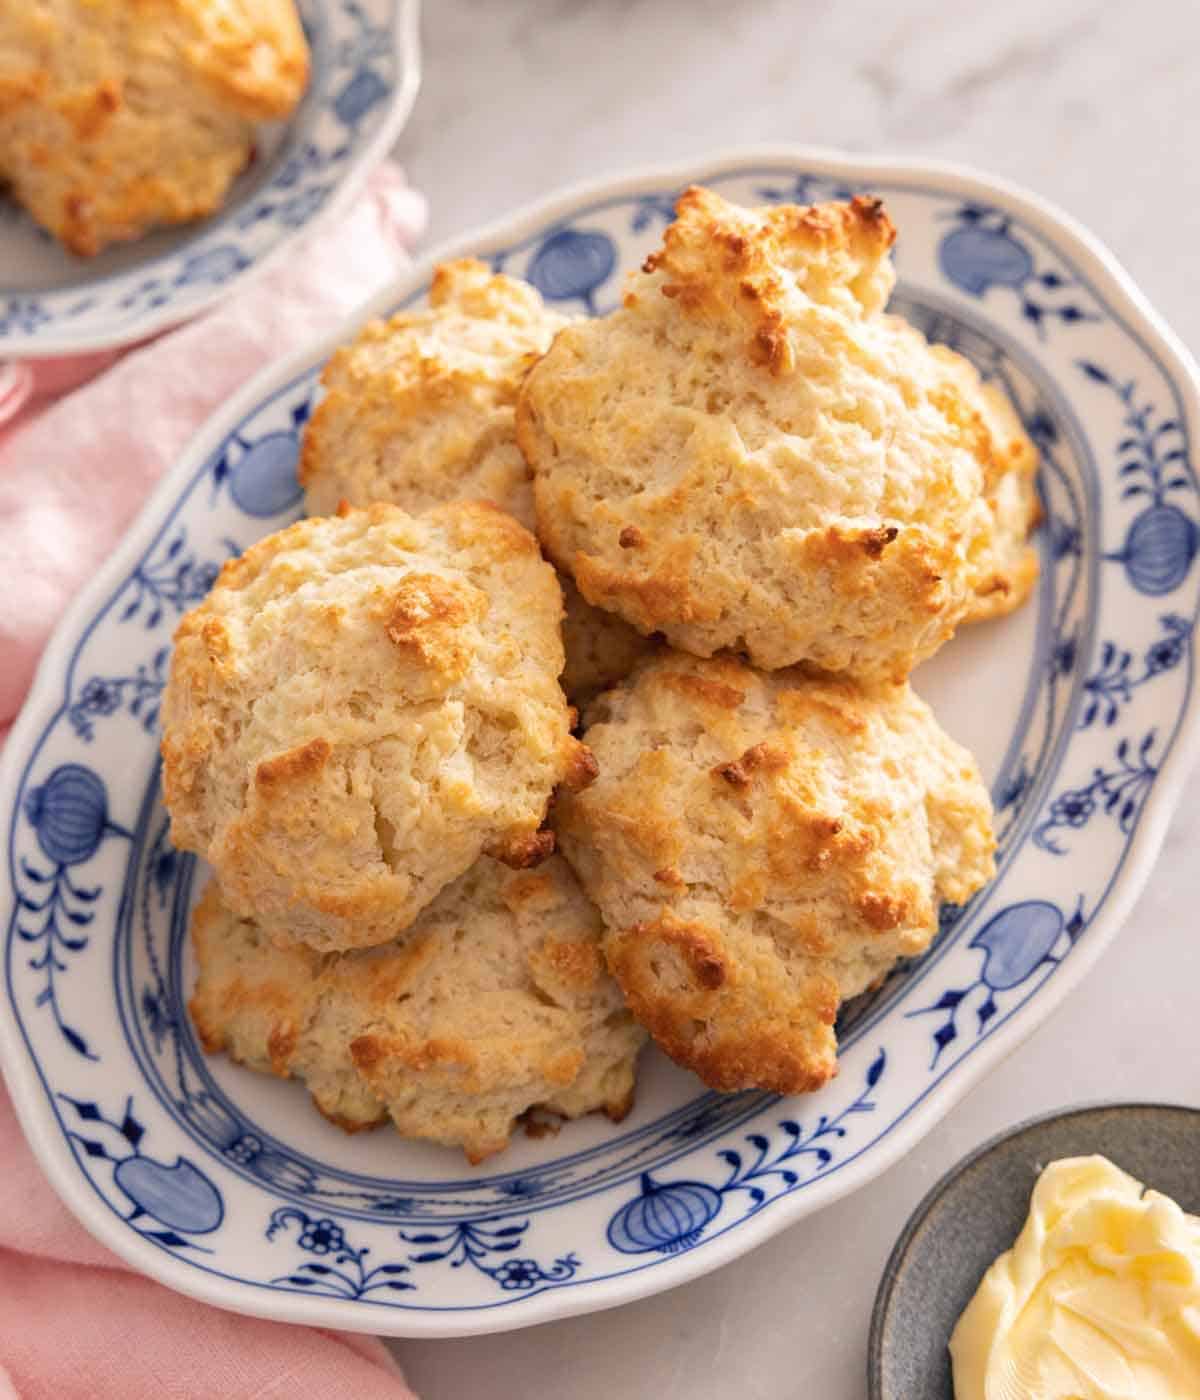 A platter of multiple drop biscuits.